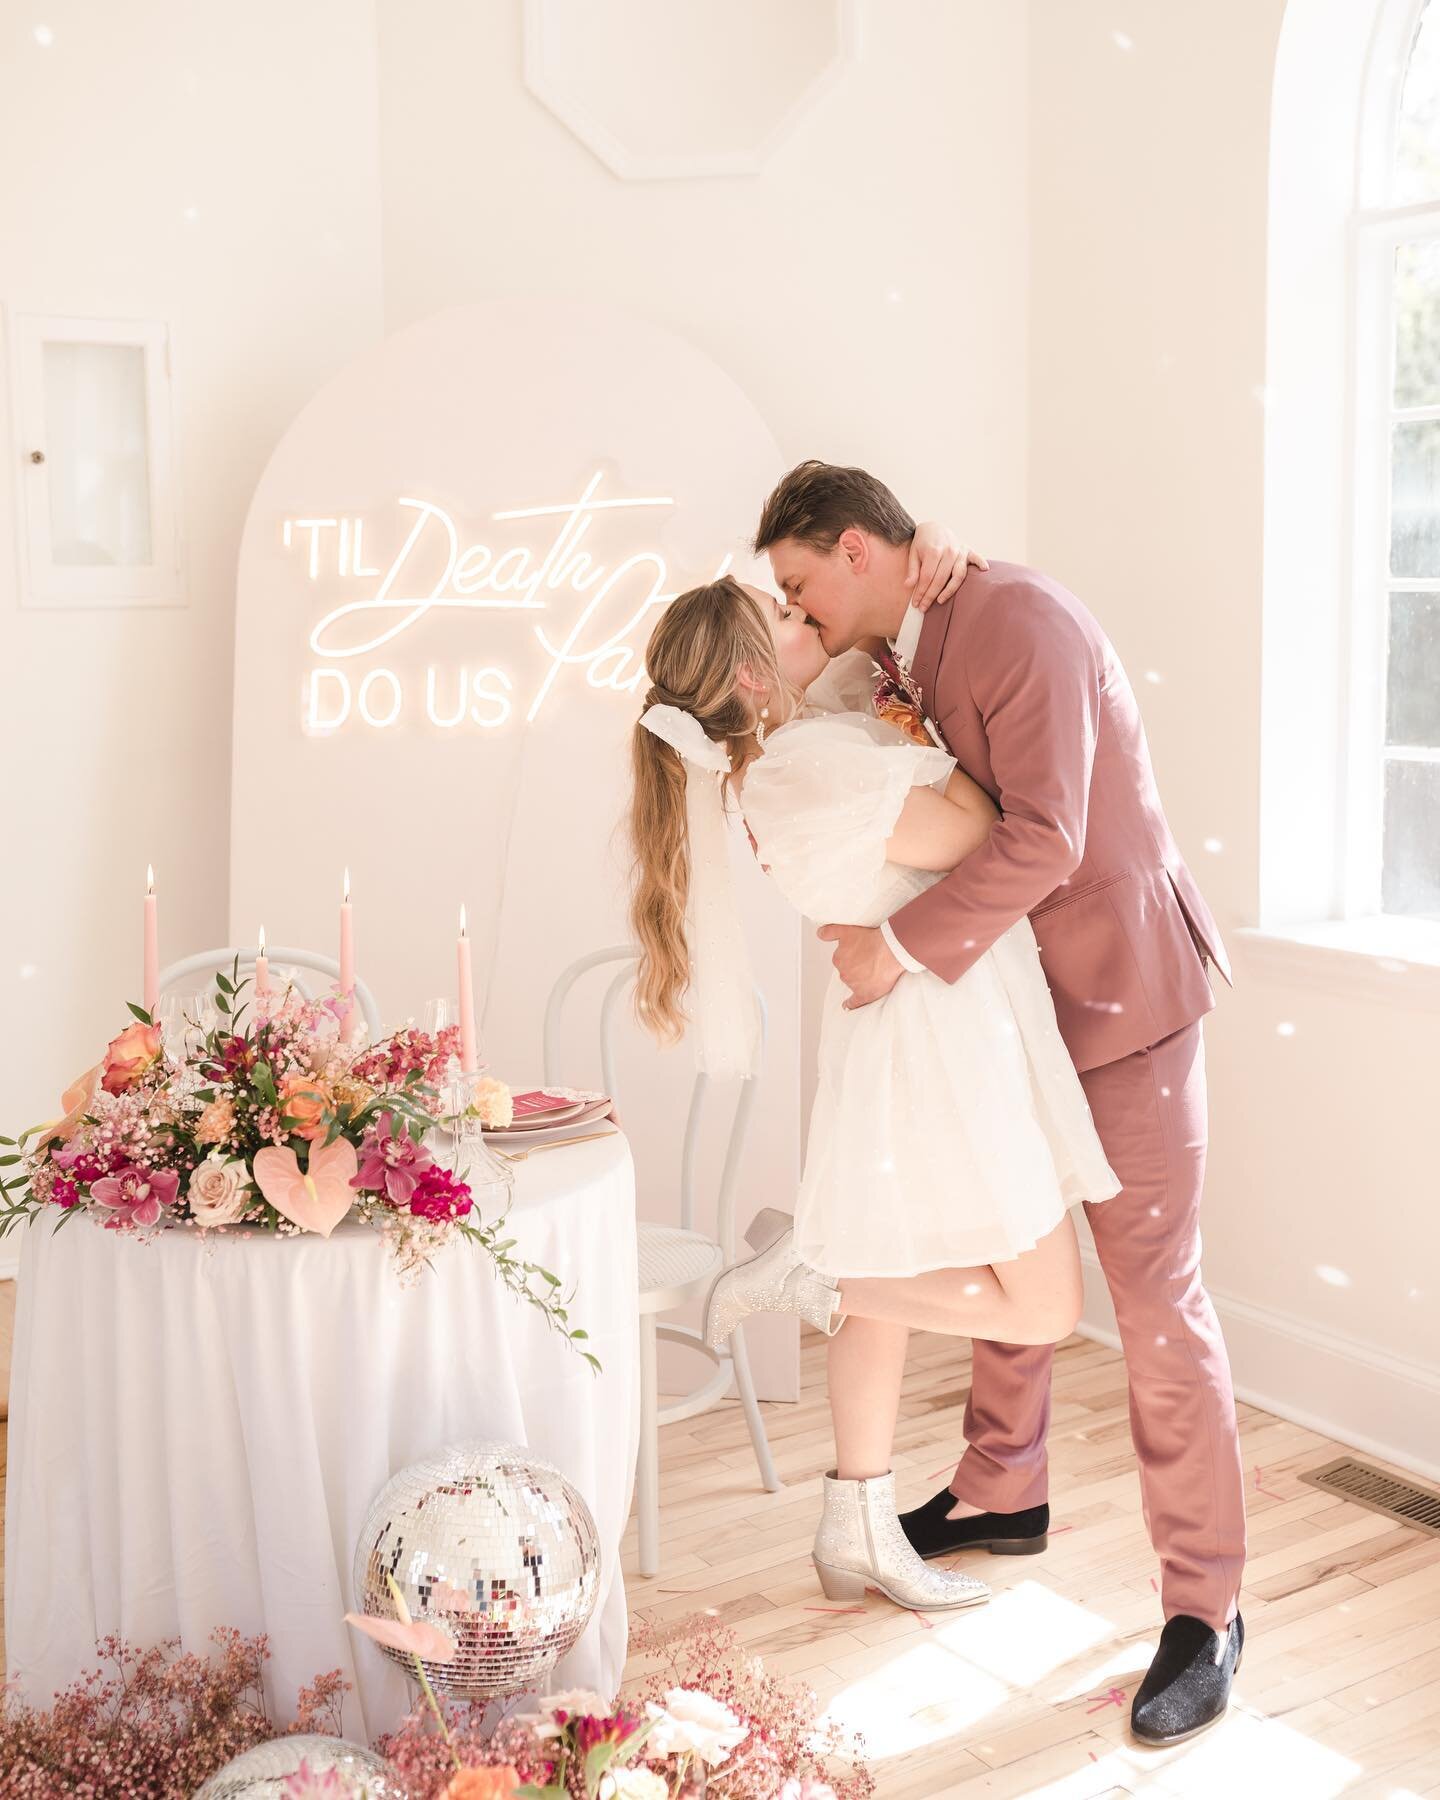 Till death do us party 💖🤍✨Such an amazing styled shoot with some incredible creatives! 

Speaker and Photographer: @rebekahviola 
Planner: @hannahelizabethevents
Venue: Harbor Hall: @theharbor_hall
Florist: @pams_petals_
Hair: @beautybychristinedar